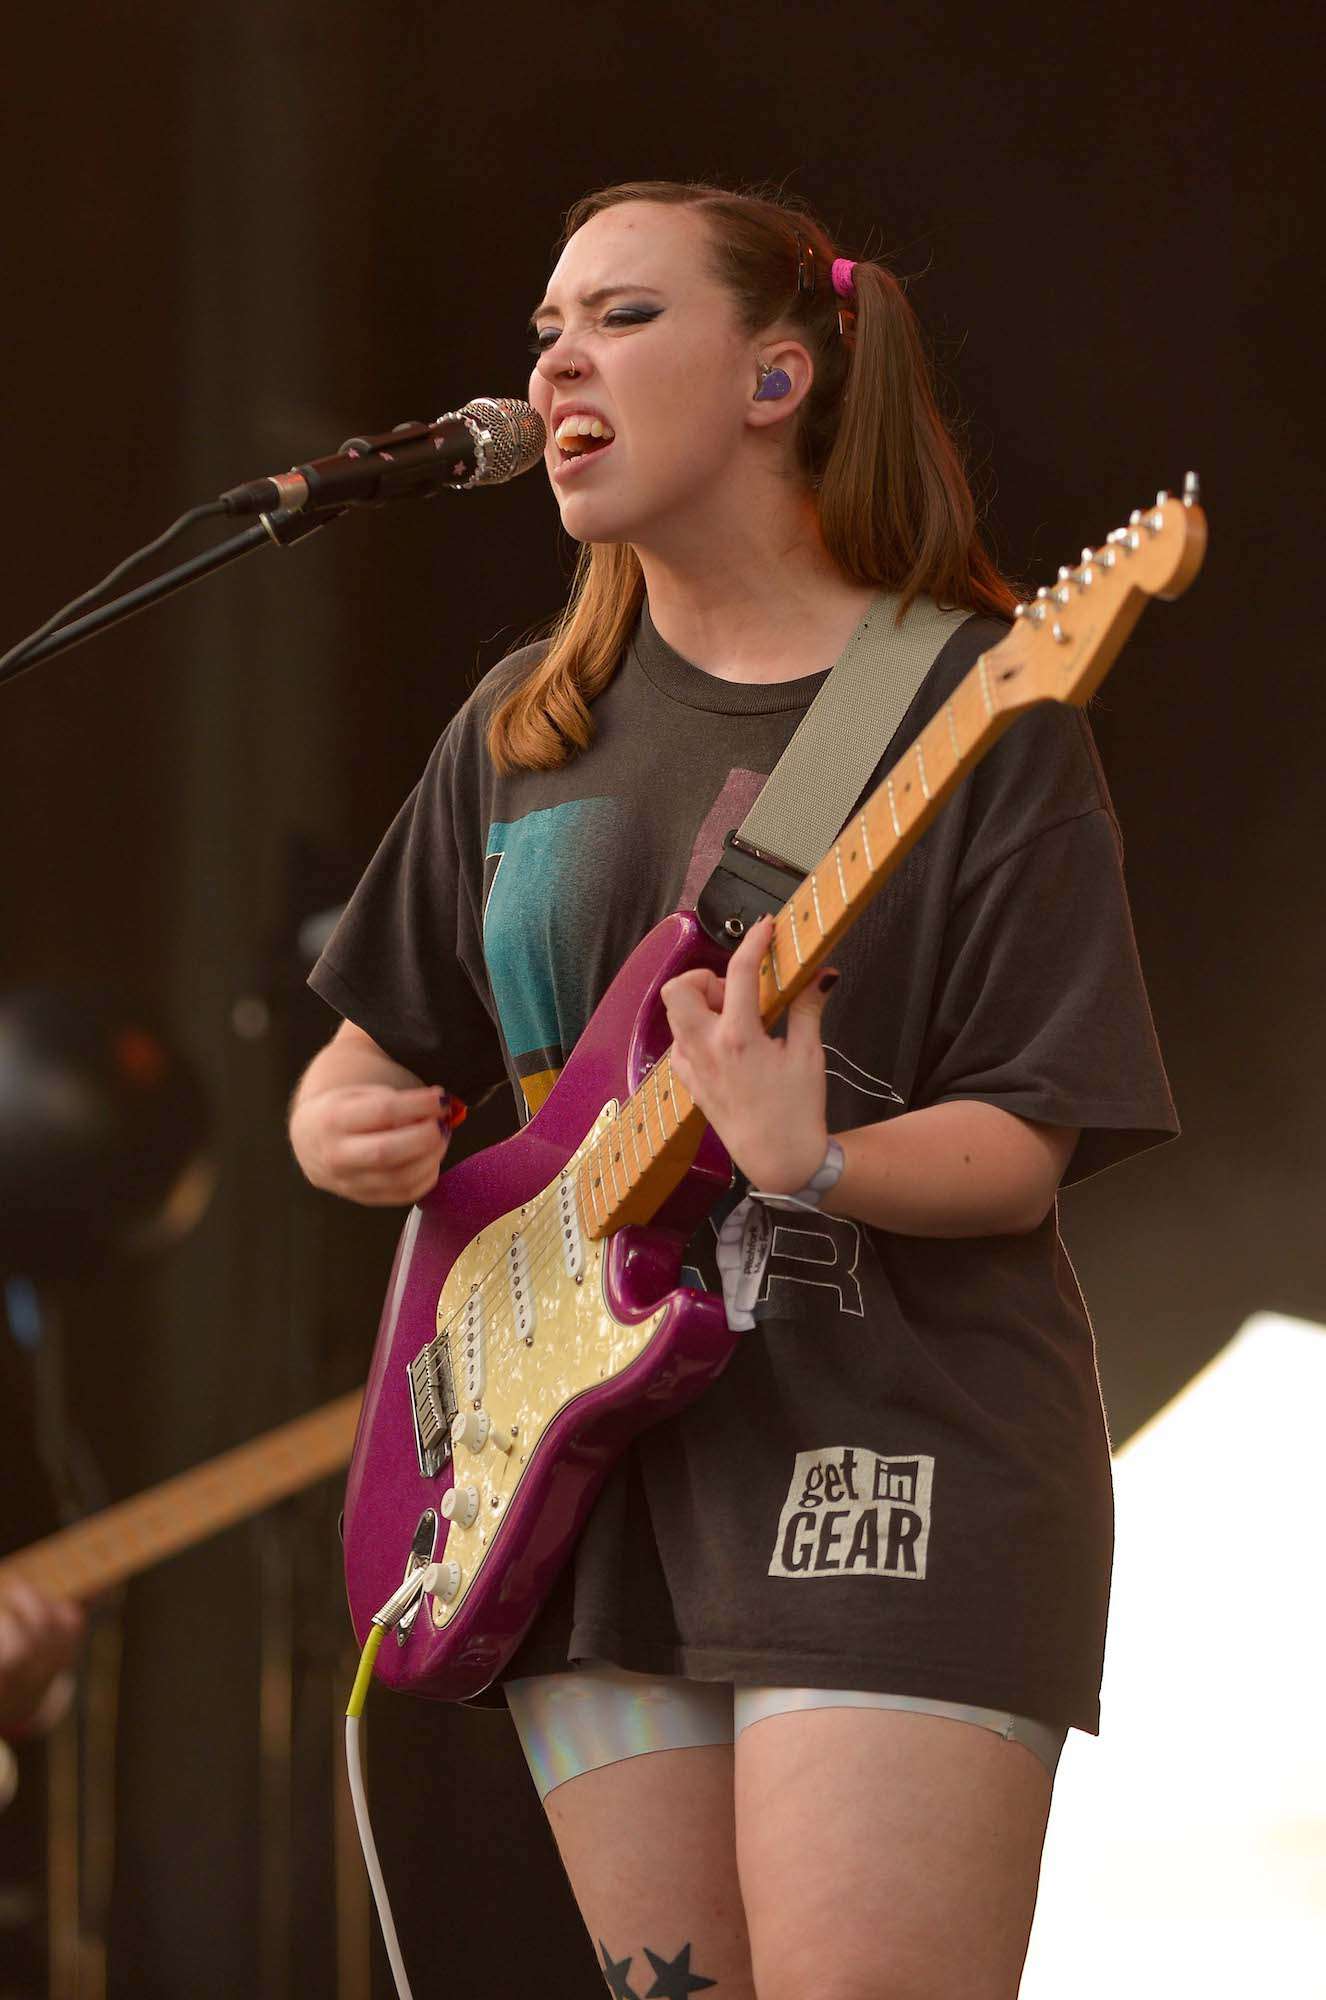 Soccer Mommy Live at Pitchfork [GALLERY] 7